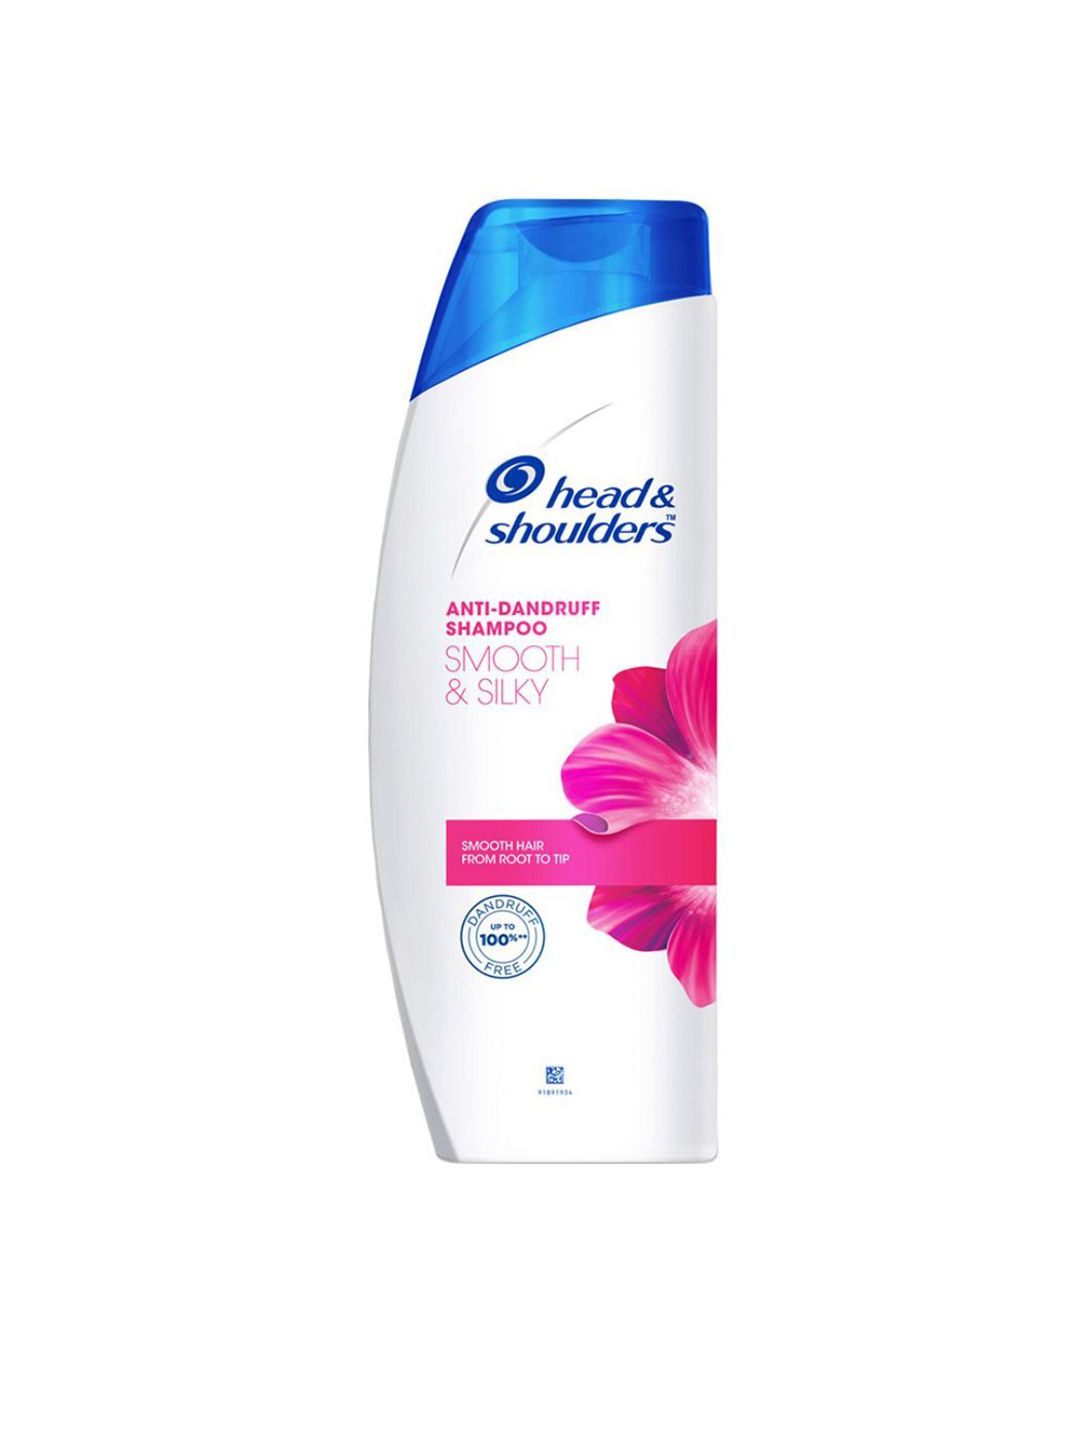 Head & Shoulders Smooth & Silky Shampoo 360 ml Price in India